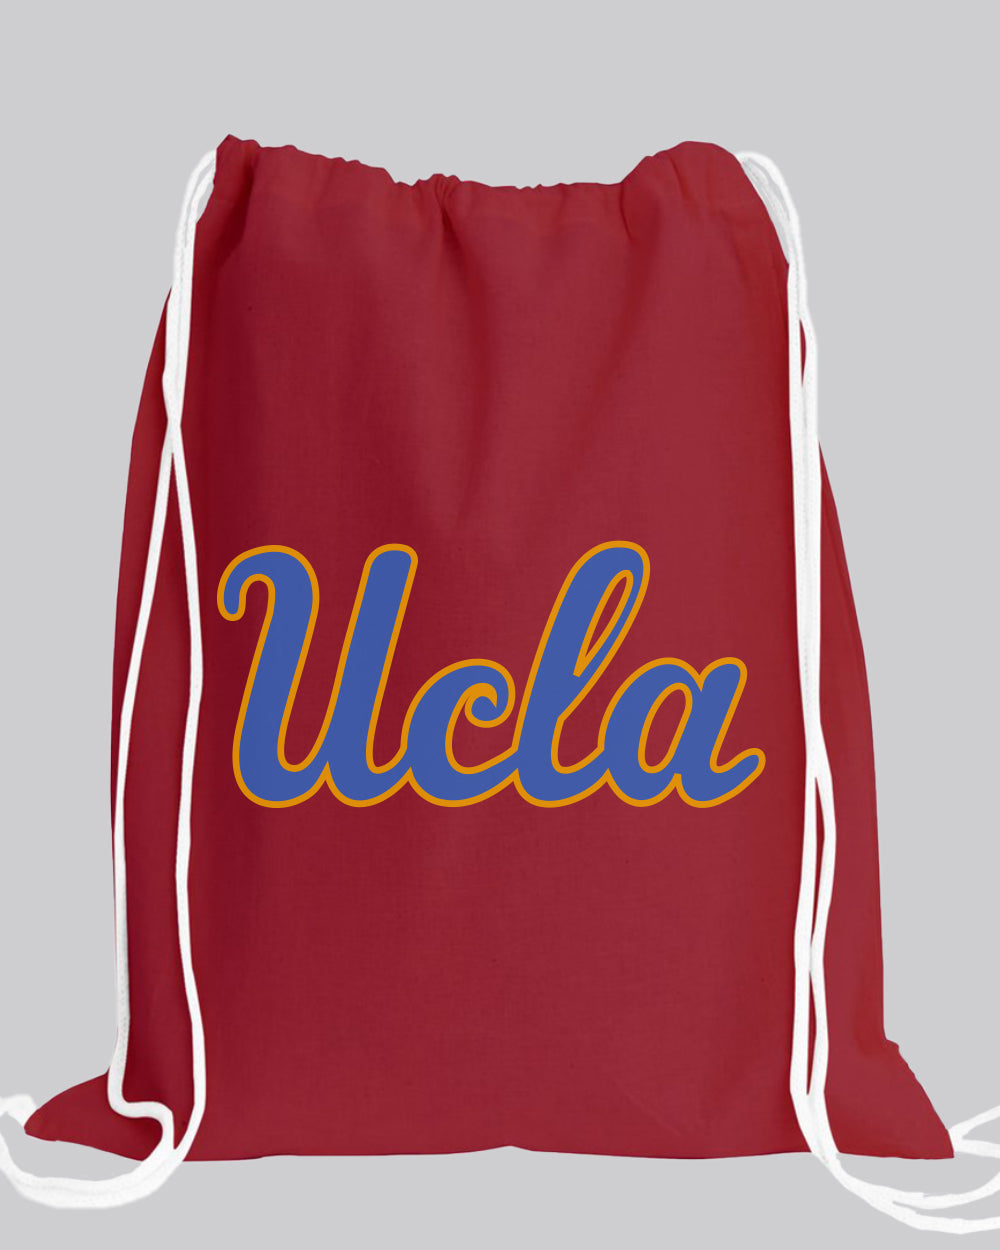 Basic Custom Drawstring Bags With Color Option - Promotional Drawstring Backpack With Your Logo